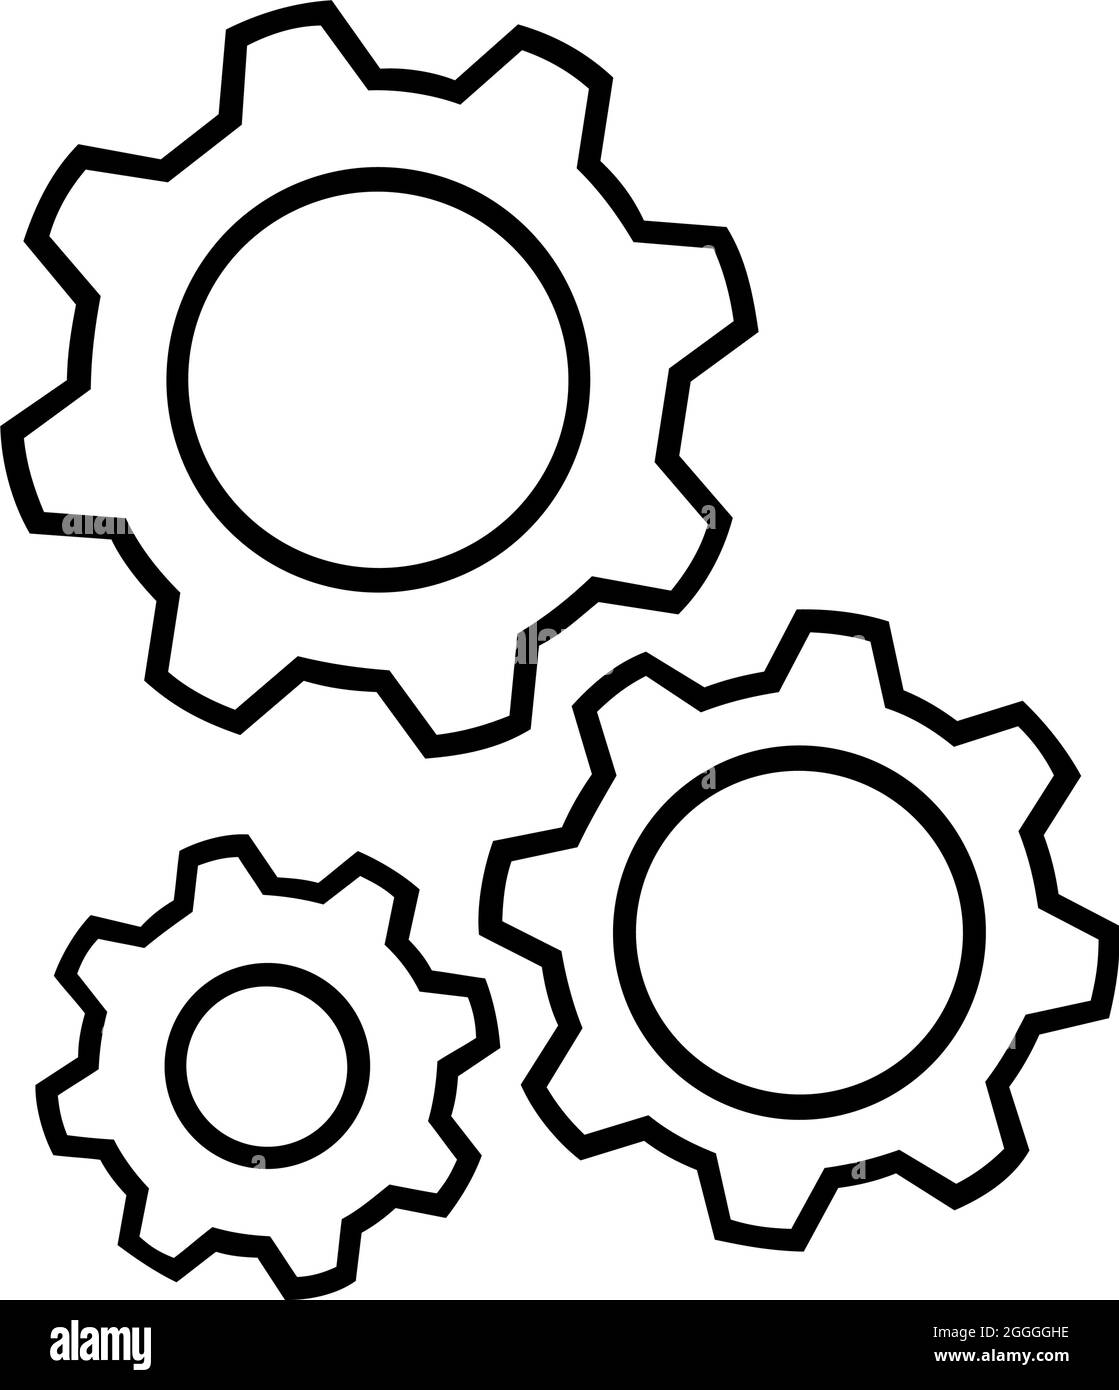 SUPPORT CENTER, GEAR ICON ISOLATED OUTLINE DRAWING Stock Vector